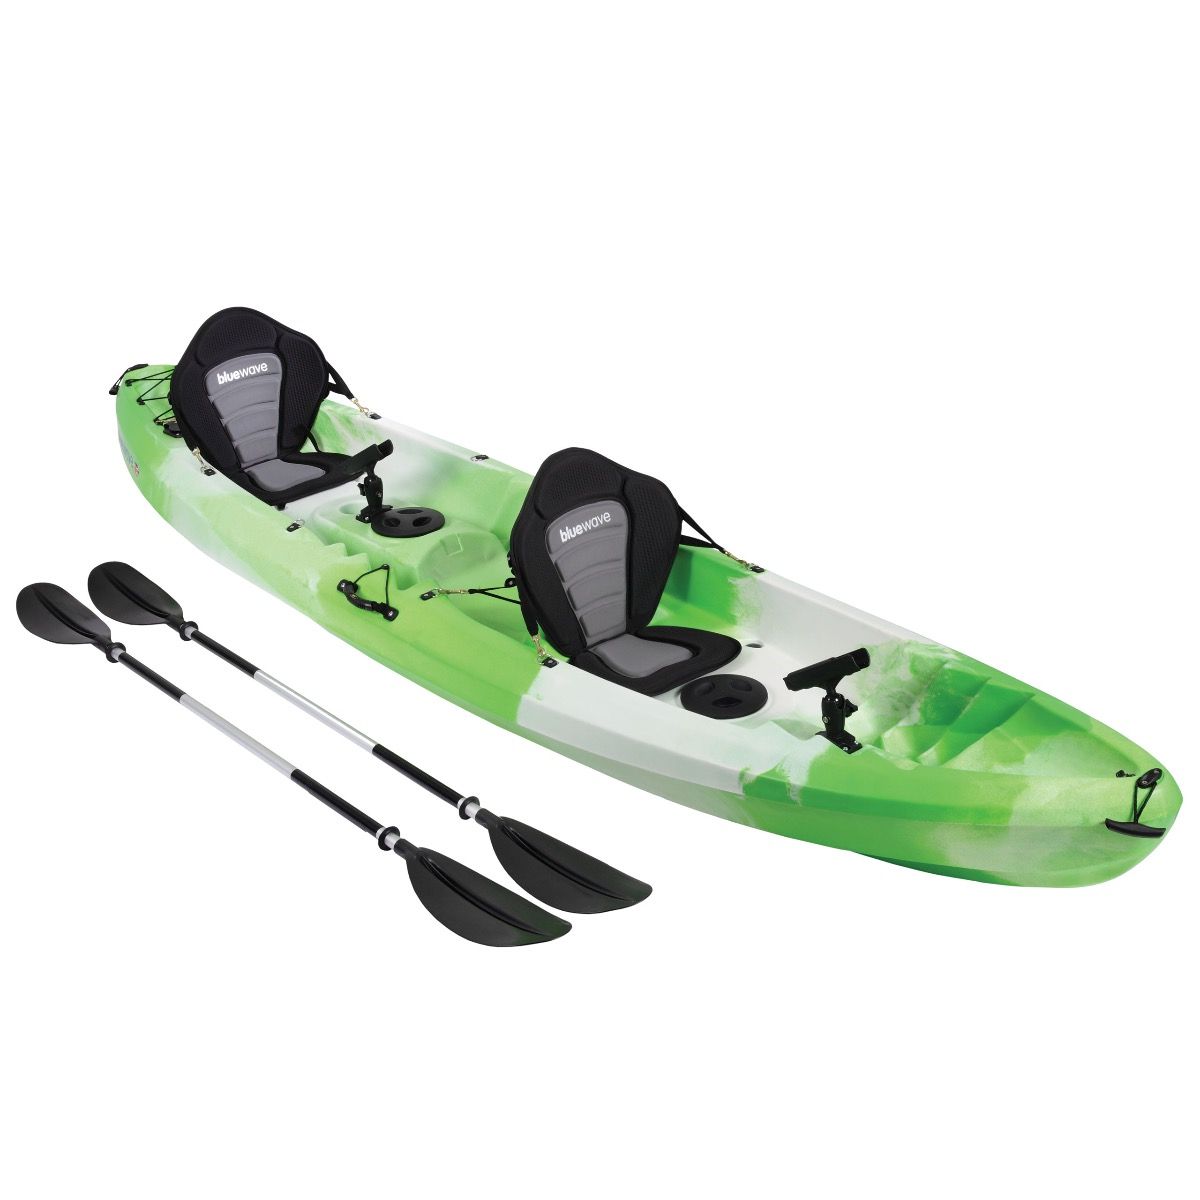 Bluewave Convoy Double Sit On Top Kayak Package - Perfect for Tandem  Paddling and Fishing - Includes Paddles and Comfortable Seats - Buy Online  Now!